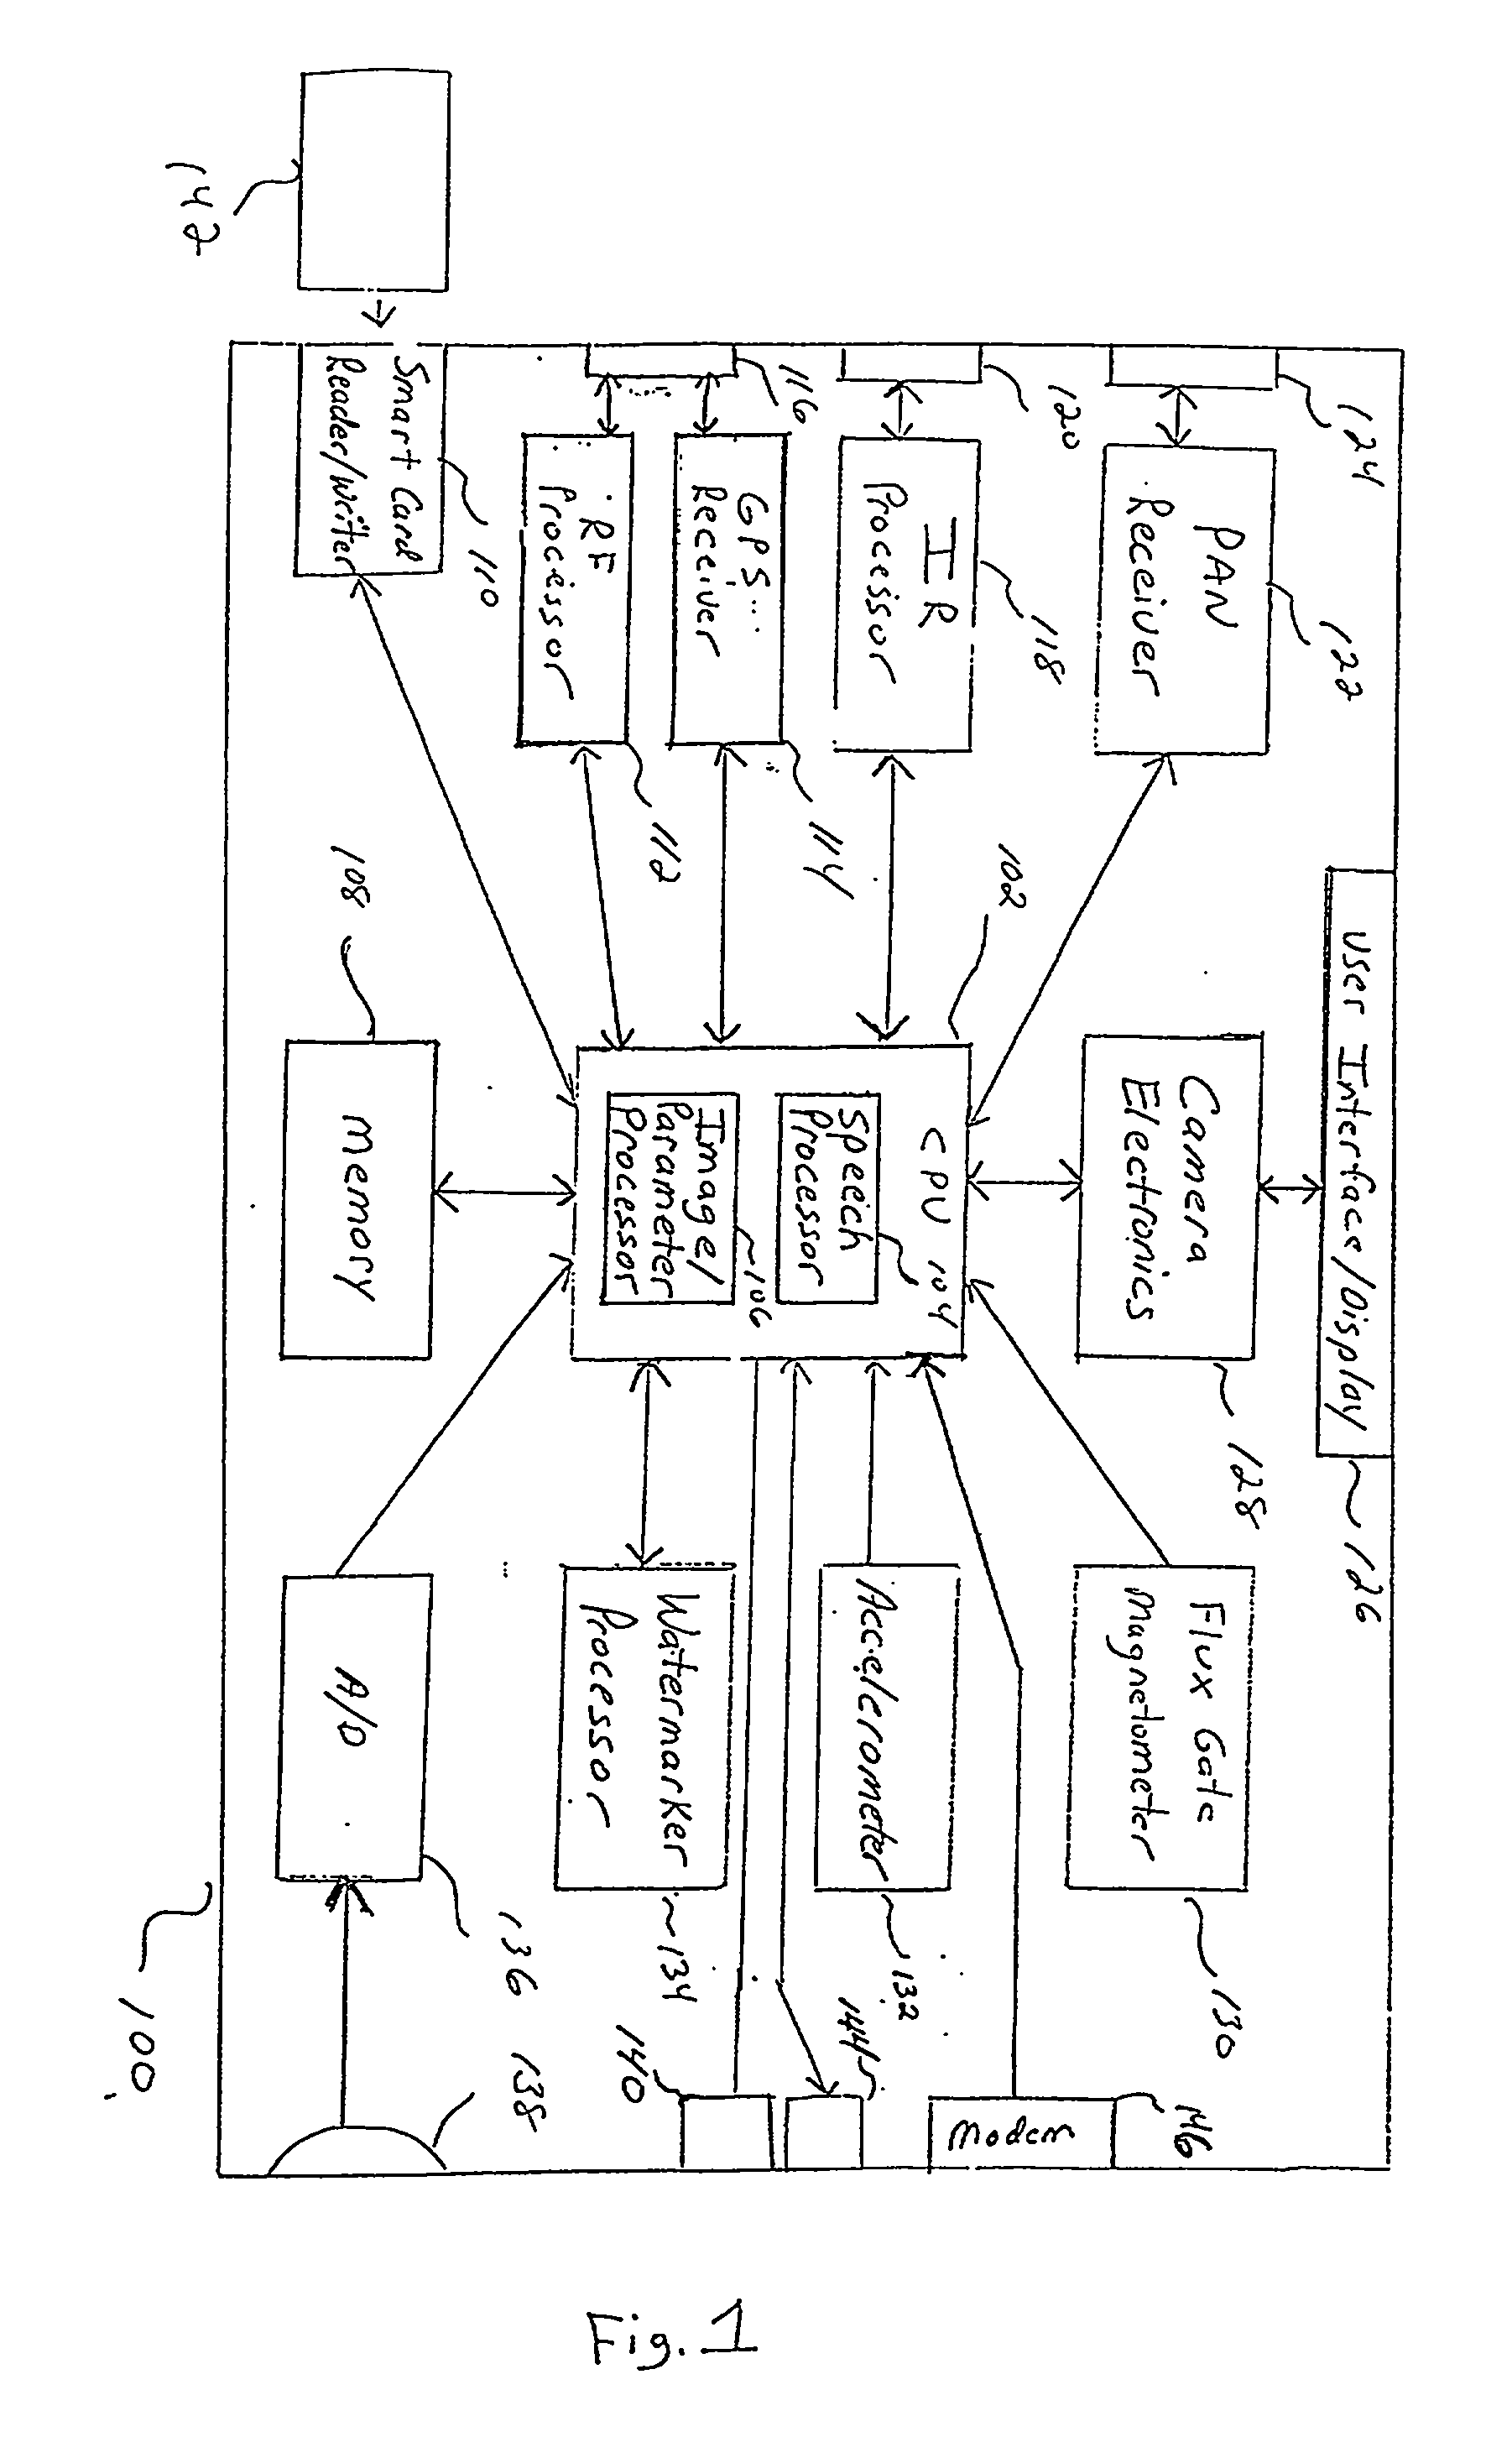 Image capturing system and method for automatically watermarking recorded parameters for providing digital image verification